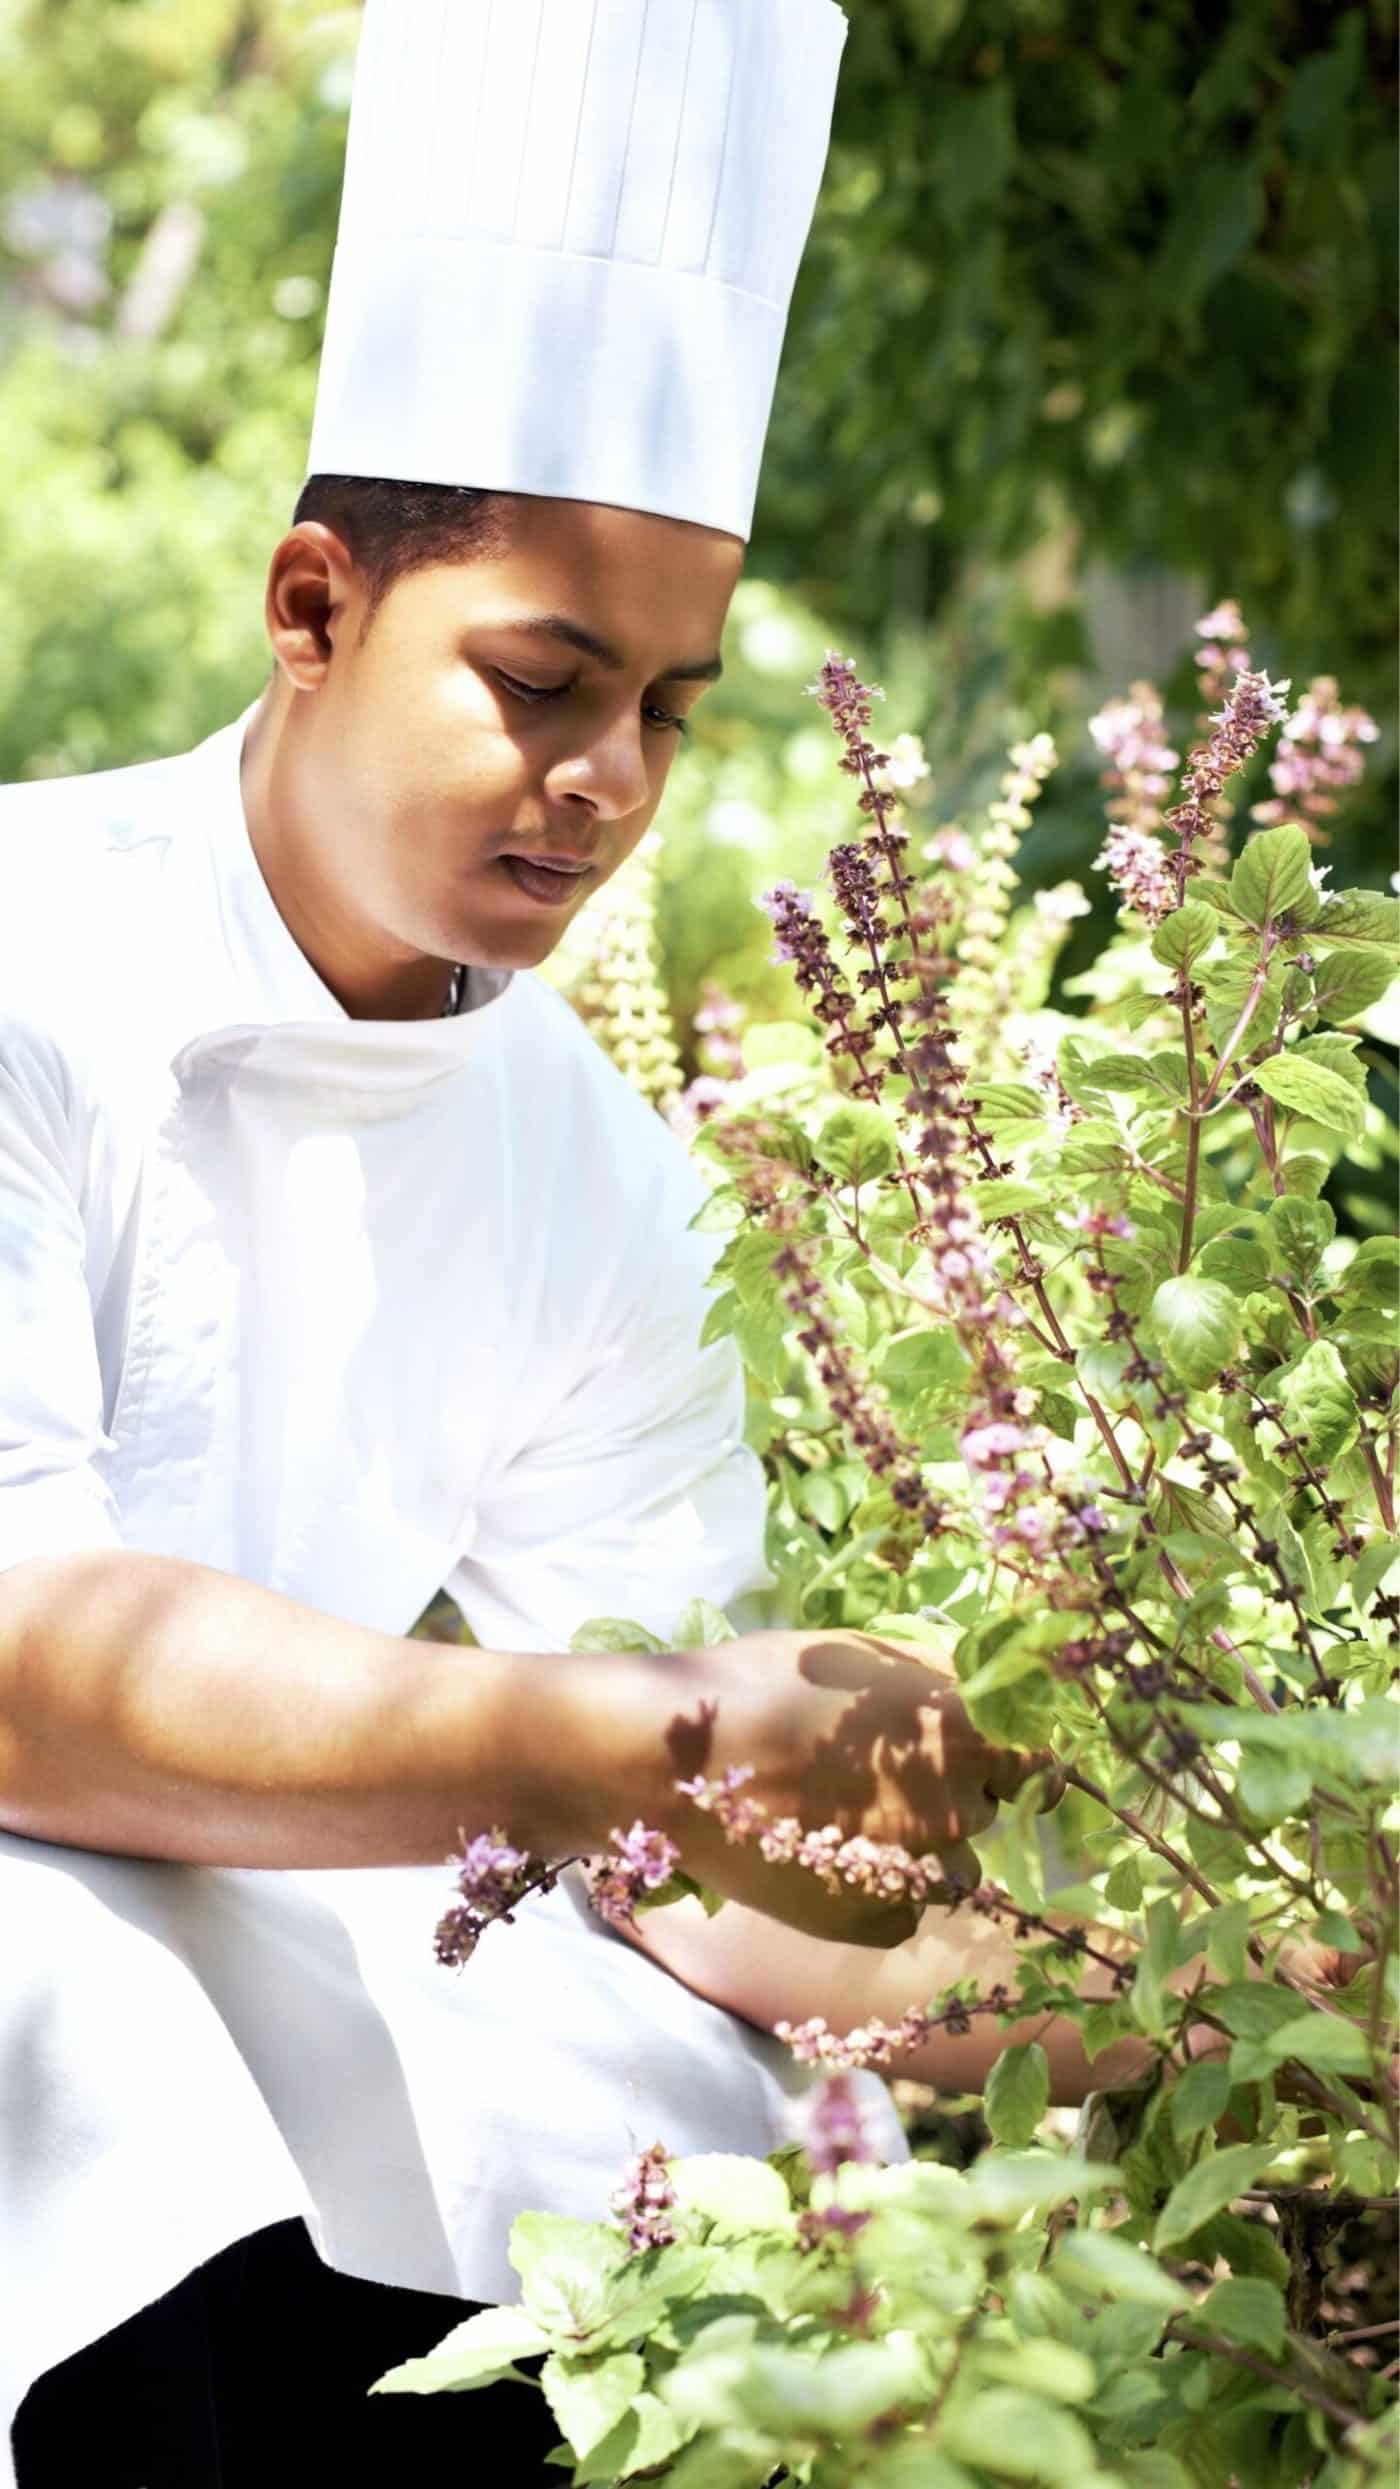 Fresh culinary herbs for a chef's garden